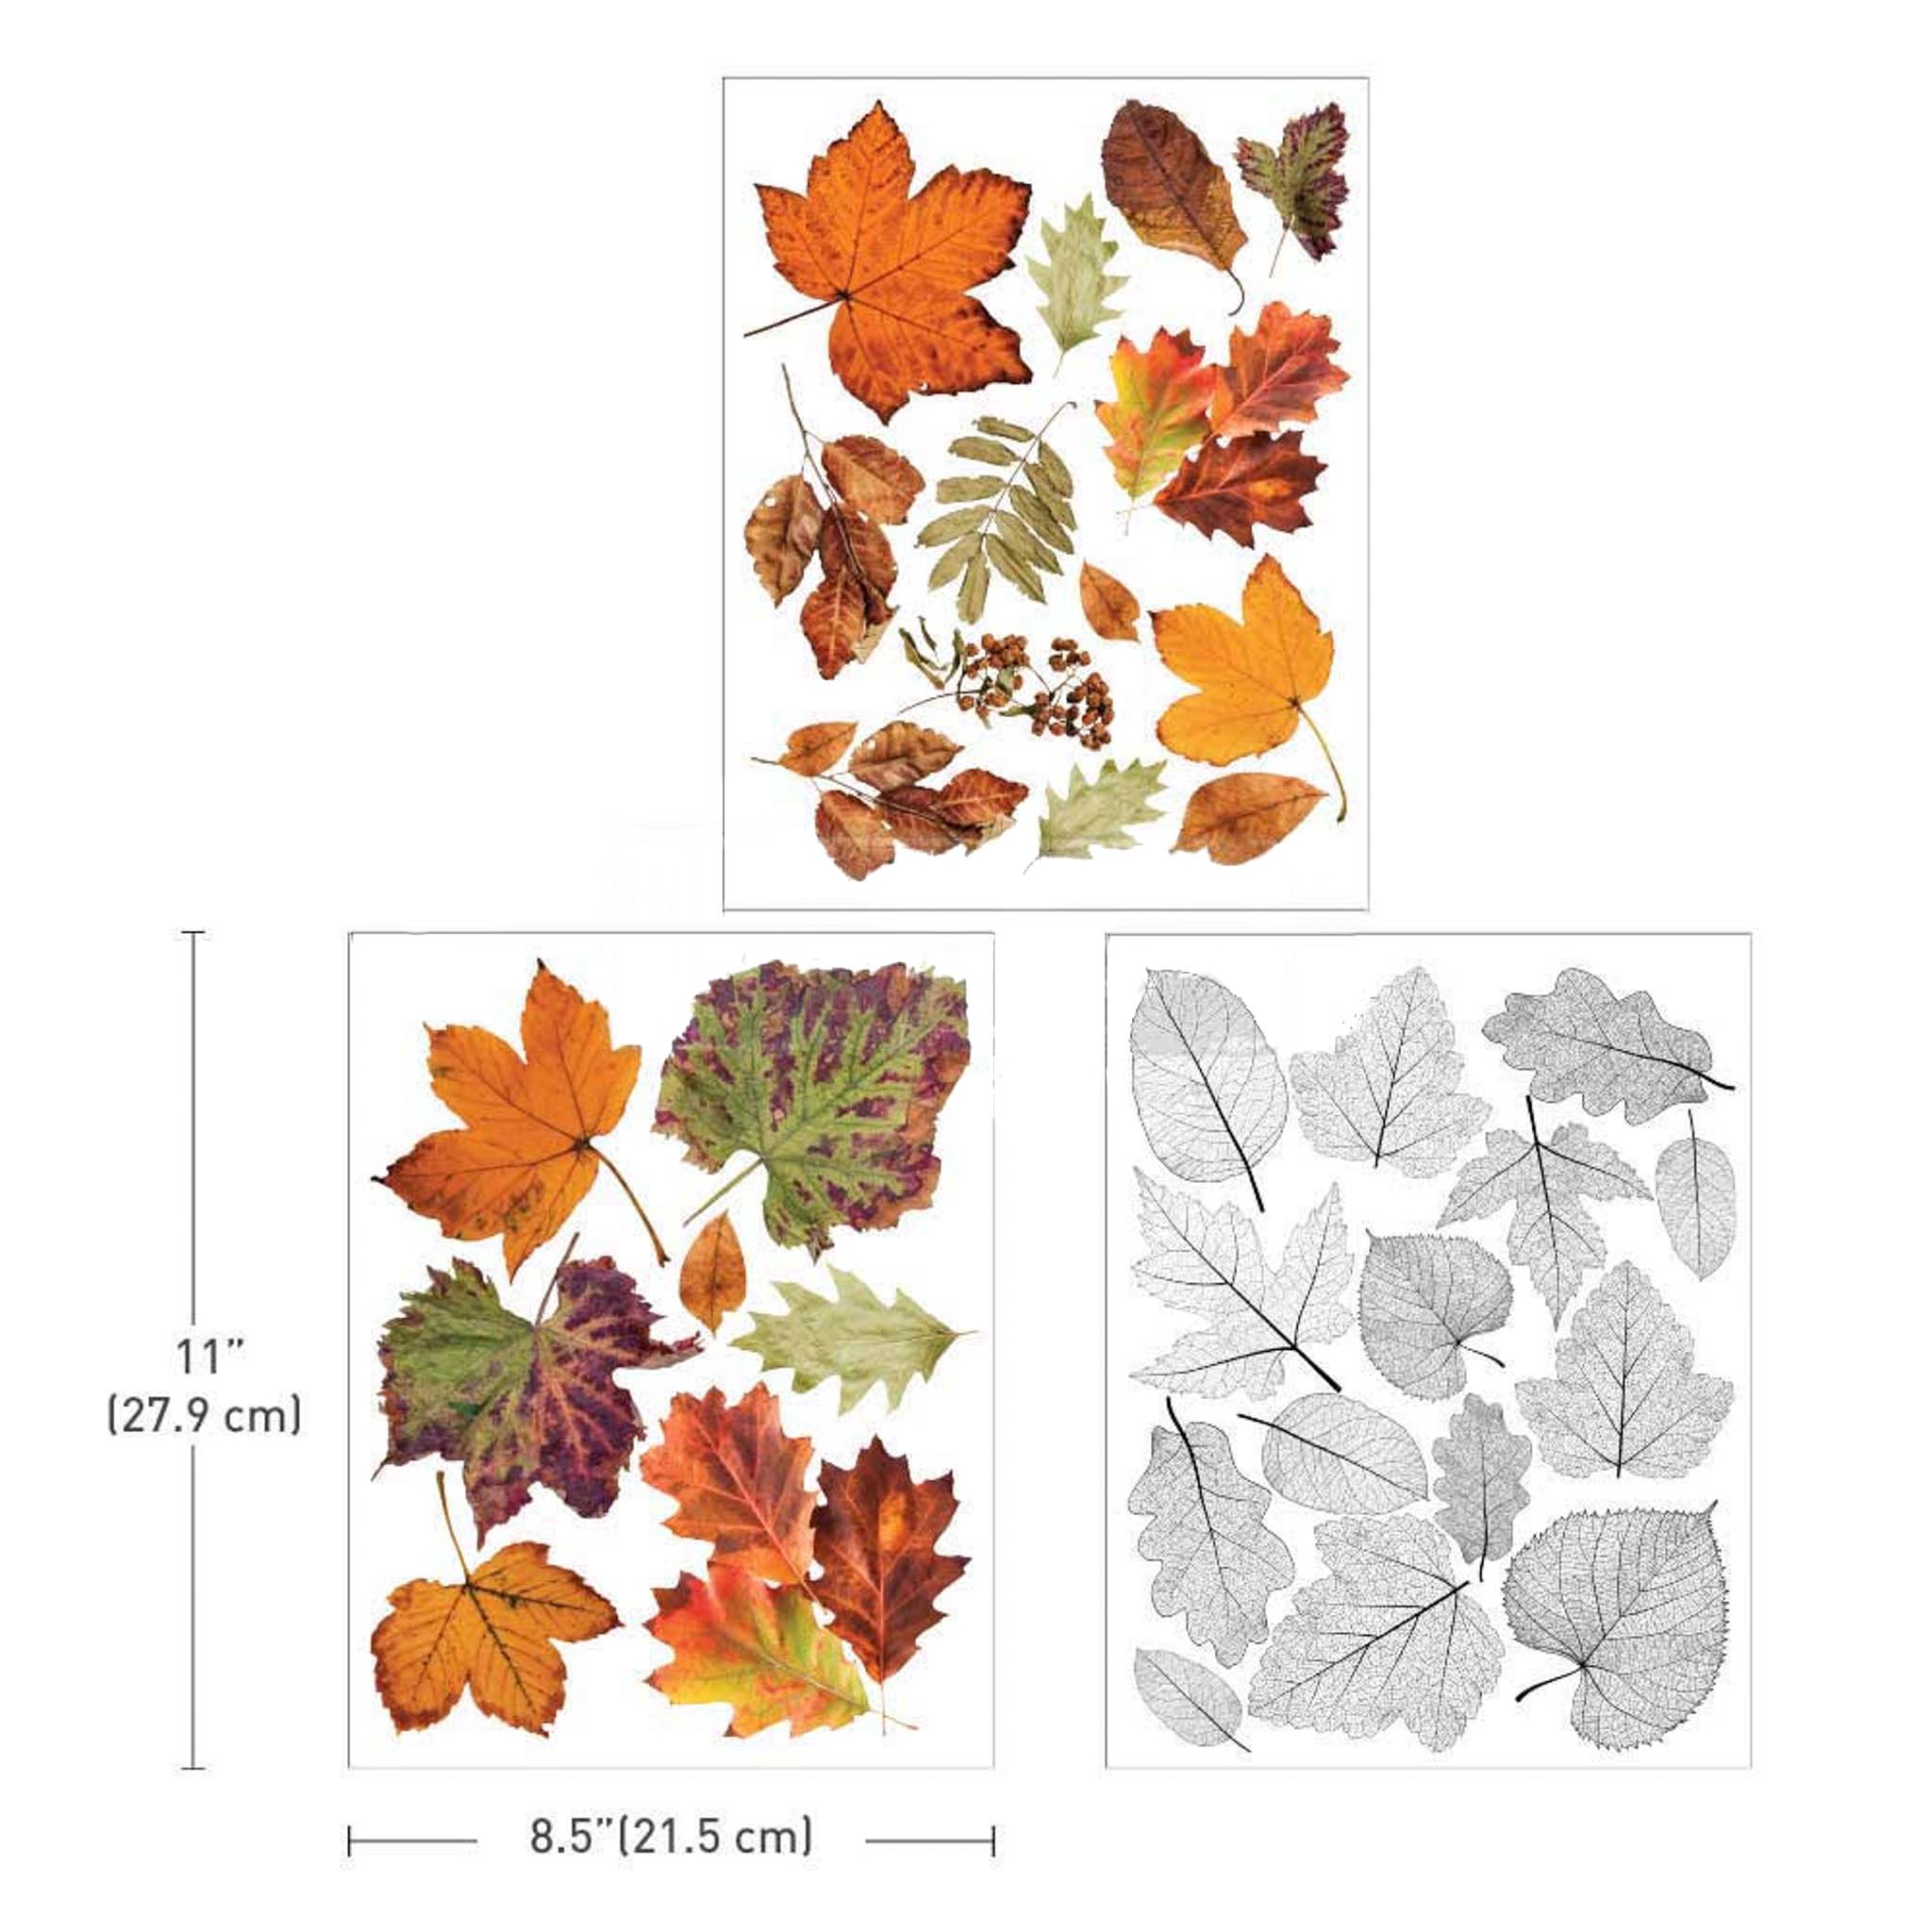 Three sheets of small rub-on transfers of fall colored leaves and translucent leaves. Measurements for 1 sheet reads: 11" [27.9 cm] by 8.5" [21.5 cm]. 